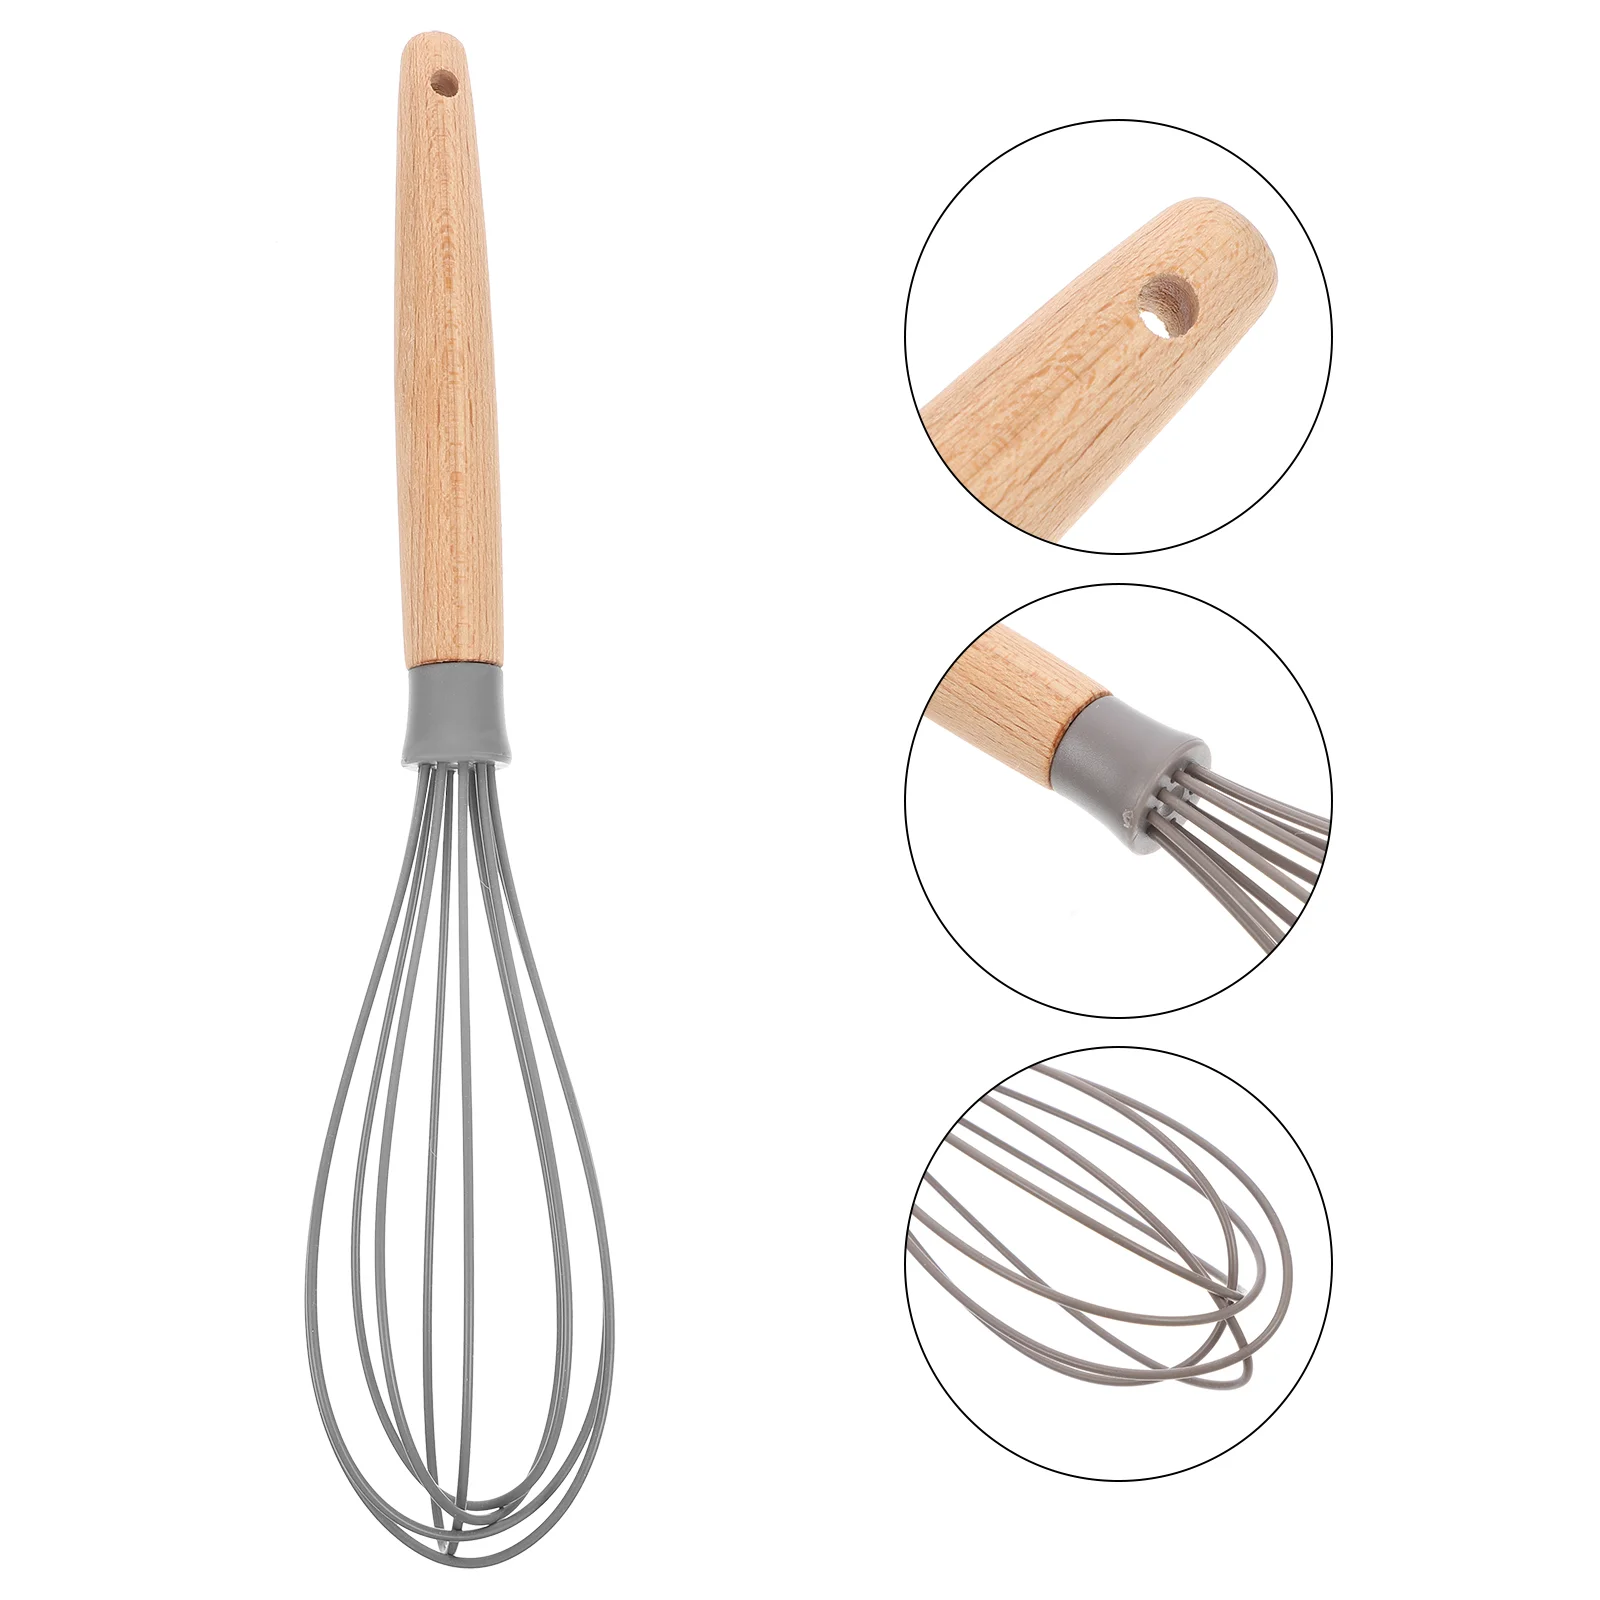 

Whisk Egg Wire Beater Balloon Hand Rubber Whisker Mixing Mini Held Whip Frother Whisks Silicone Cooking Premium Non Stick Heat